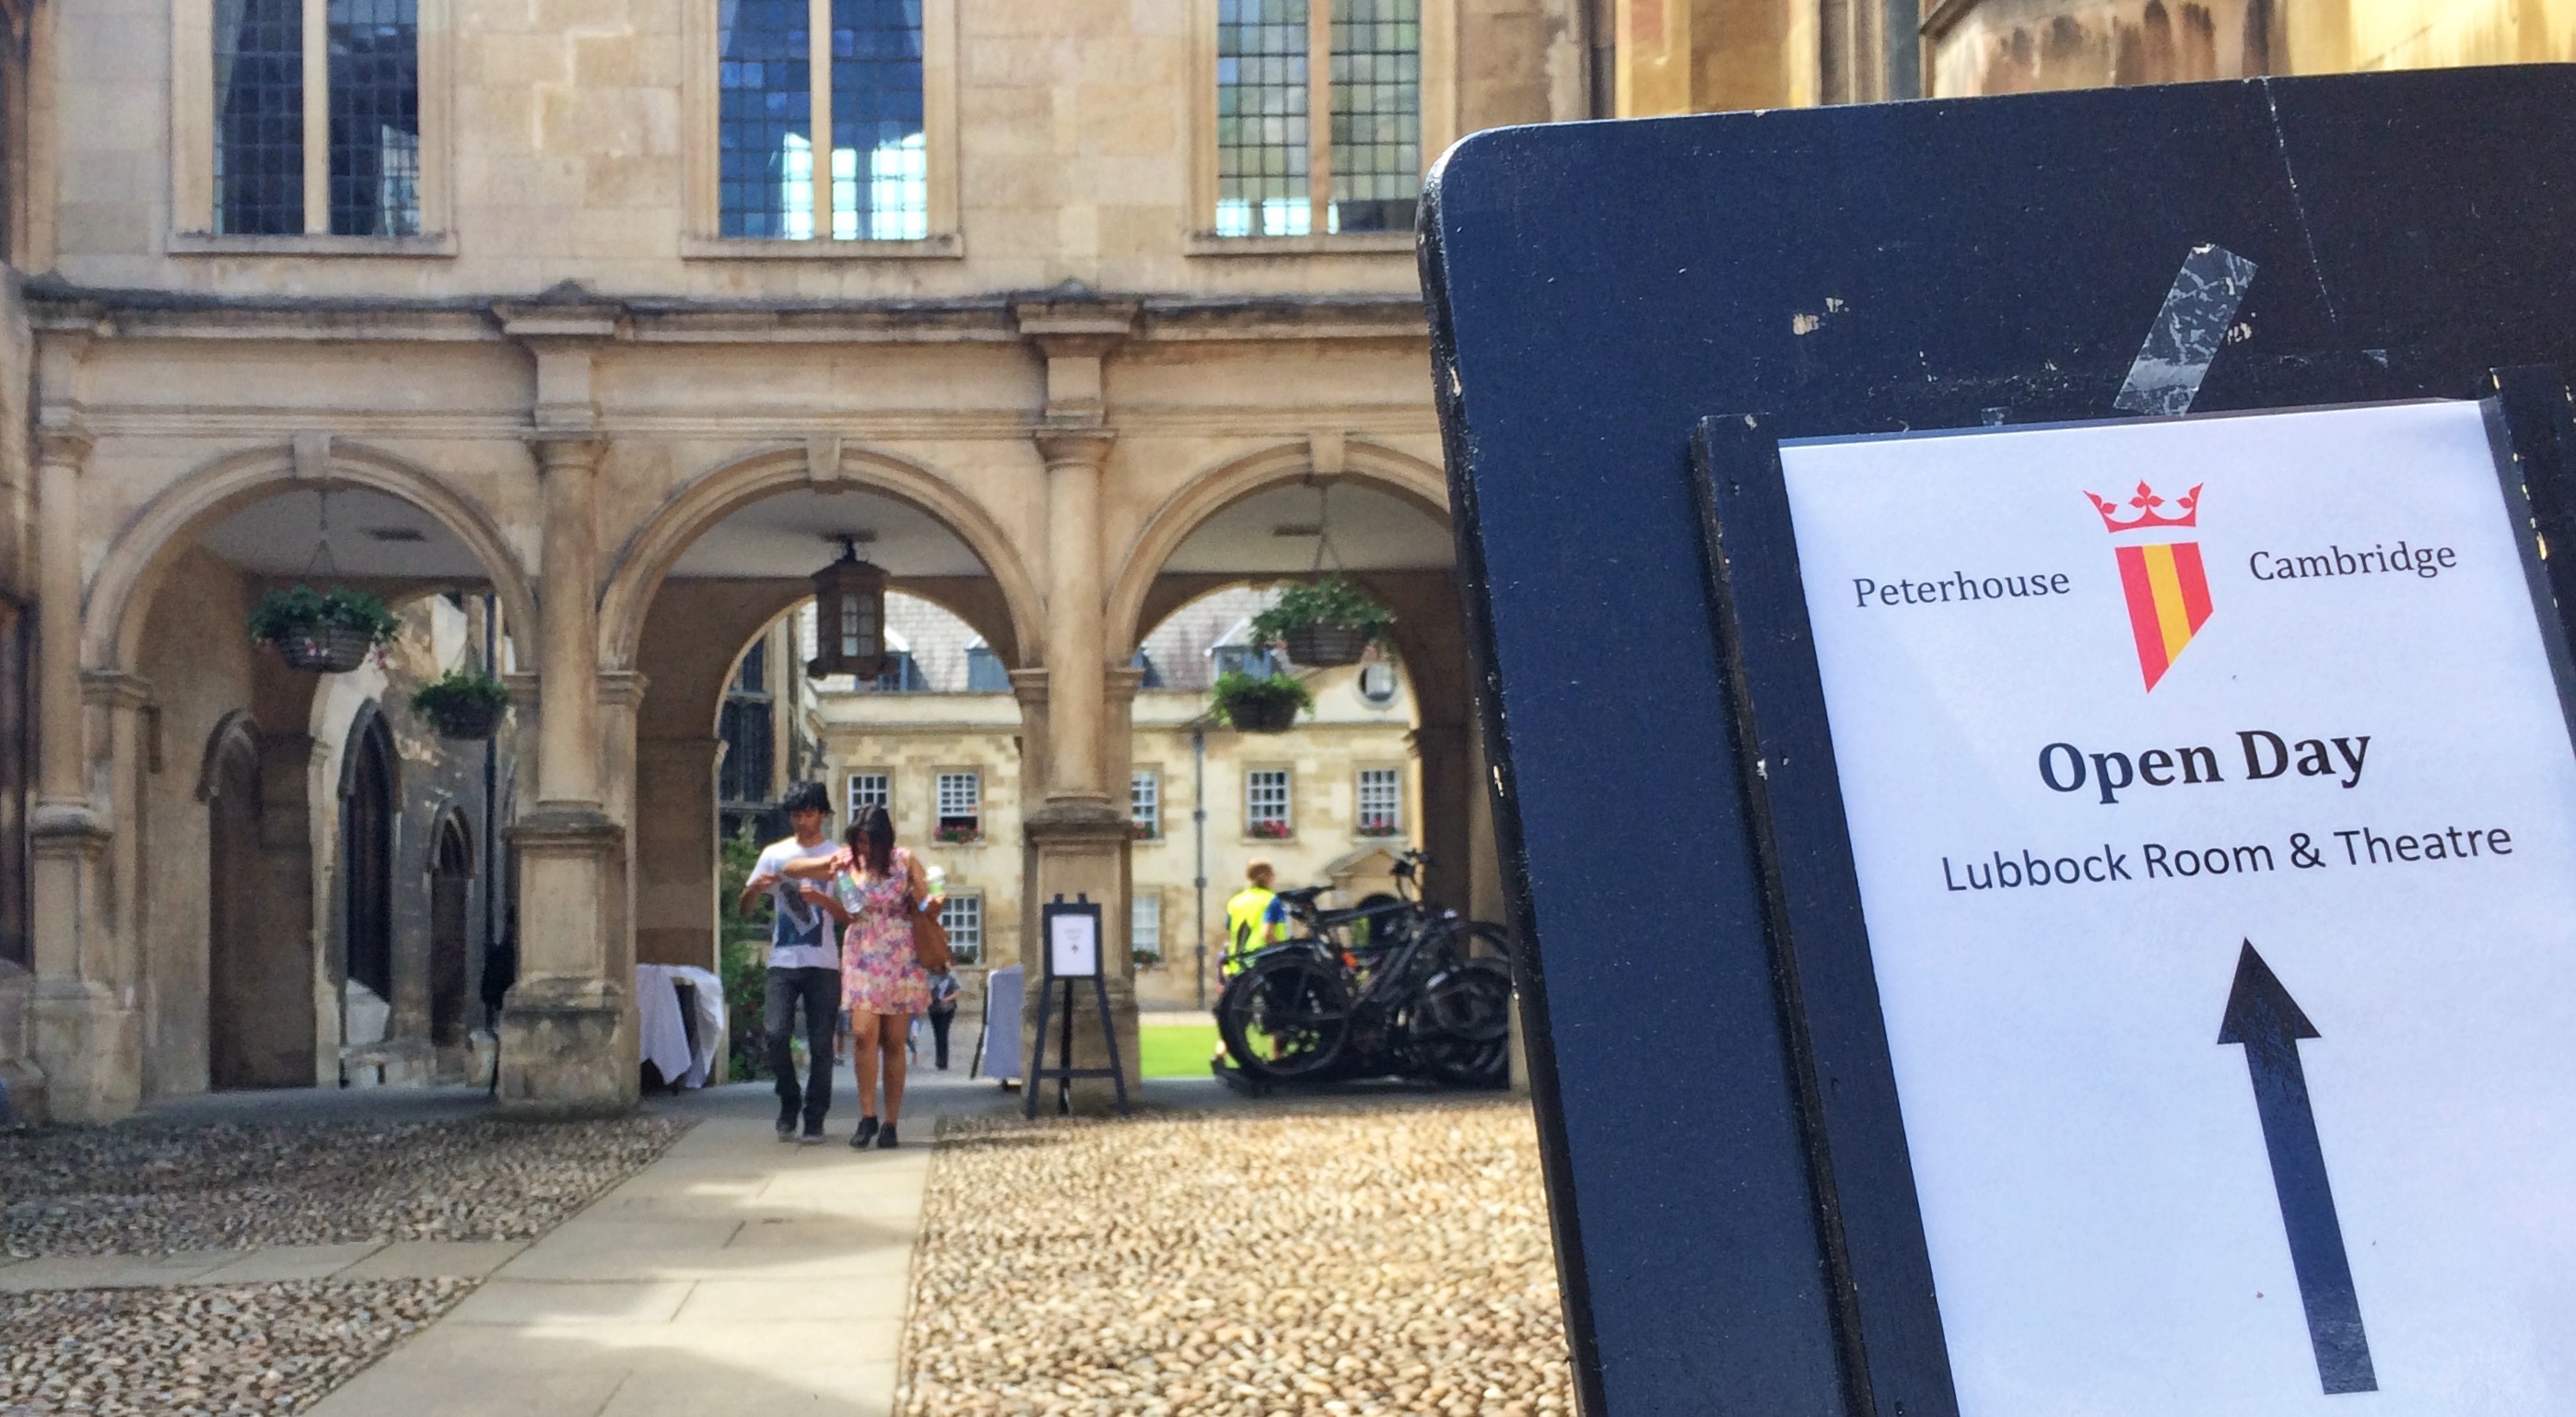 A signpost directing attendees for an Open Day at Peterhouse